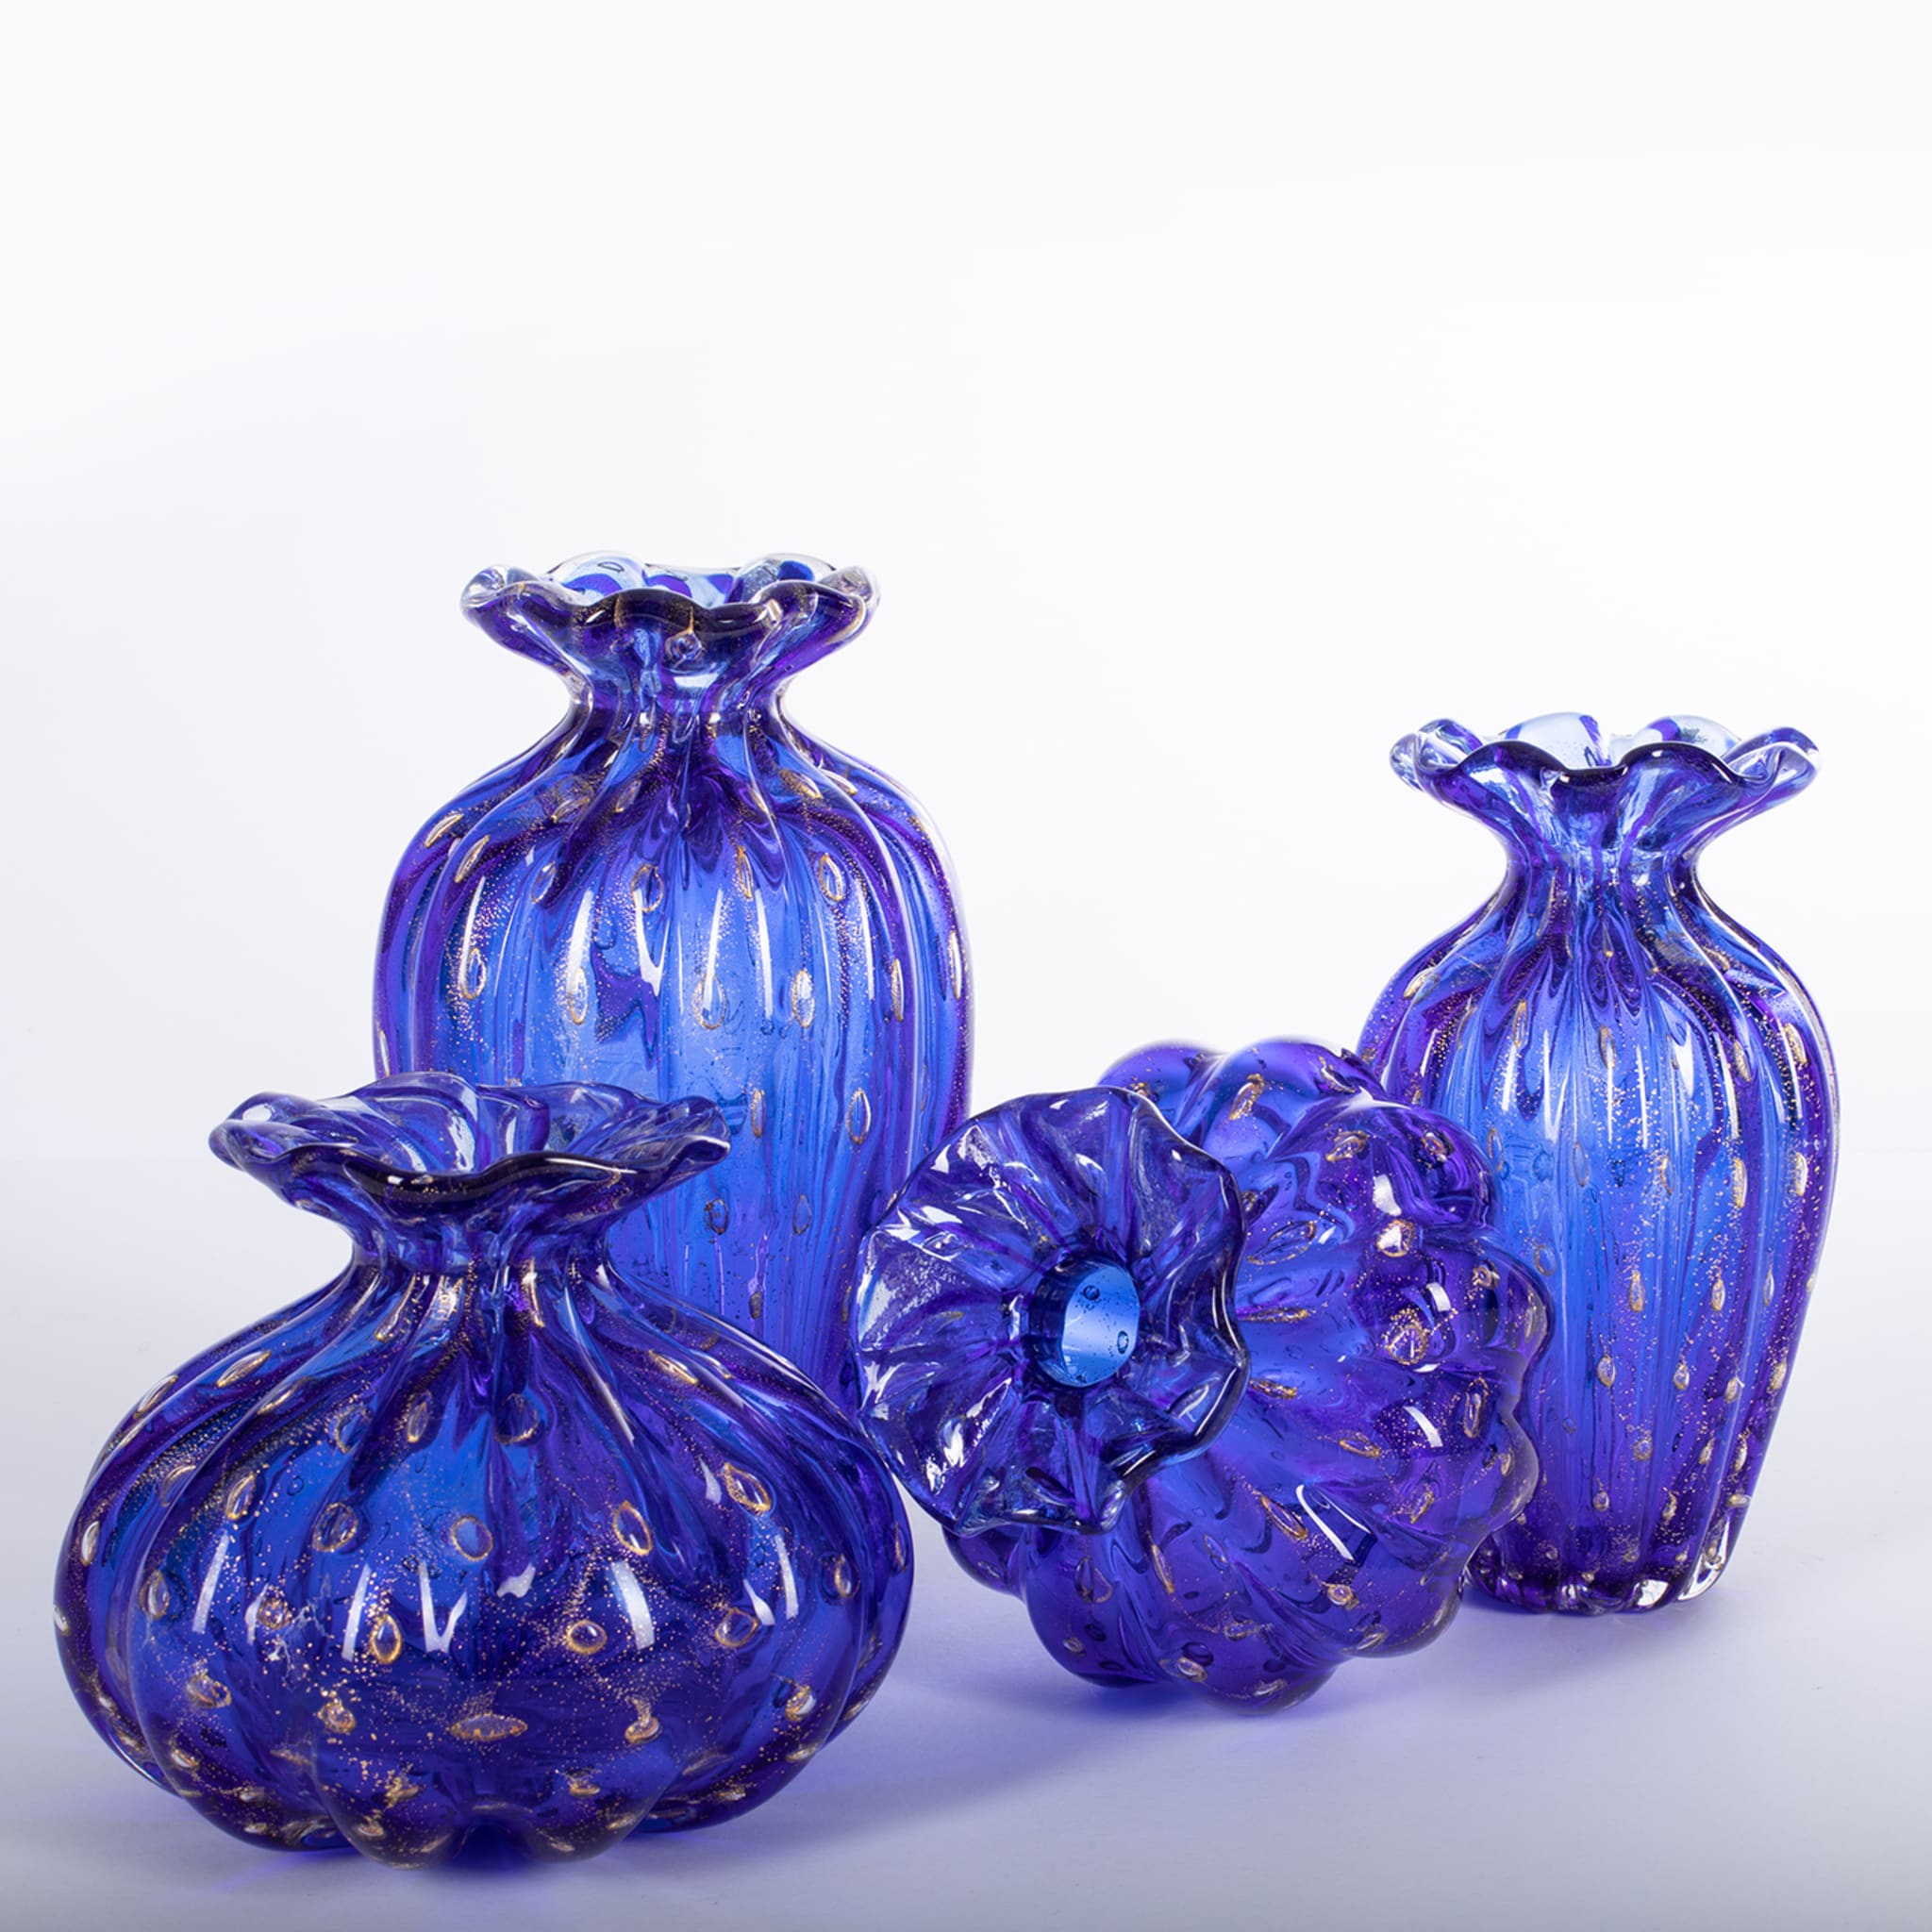 1950 Set of 2 Blue Vases with Gold Bubbles - Alternative view 2